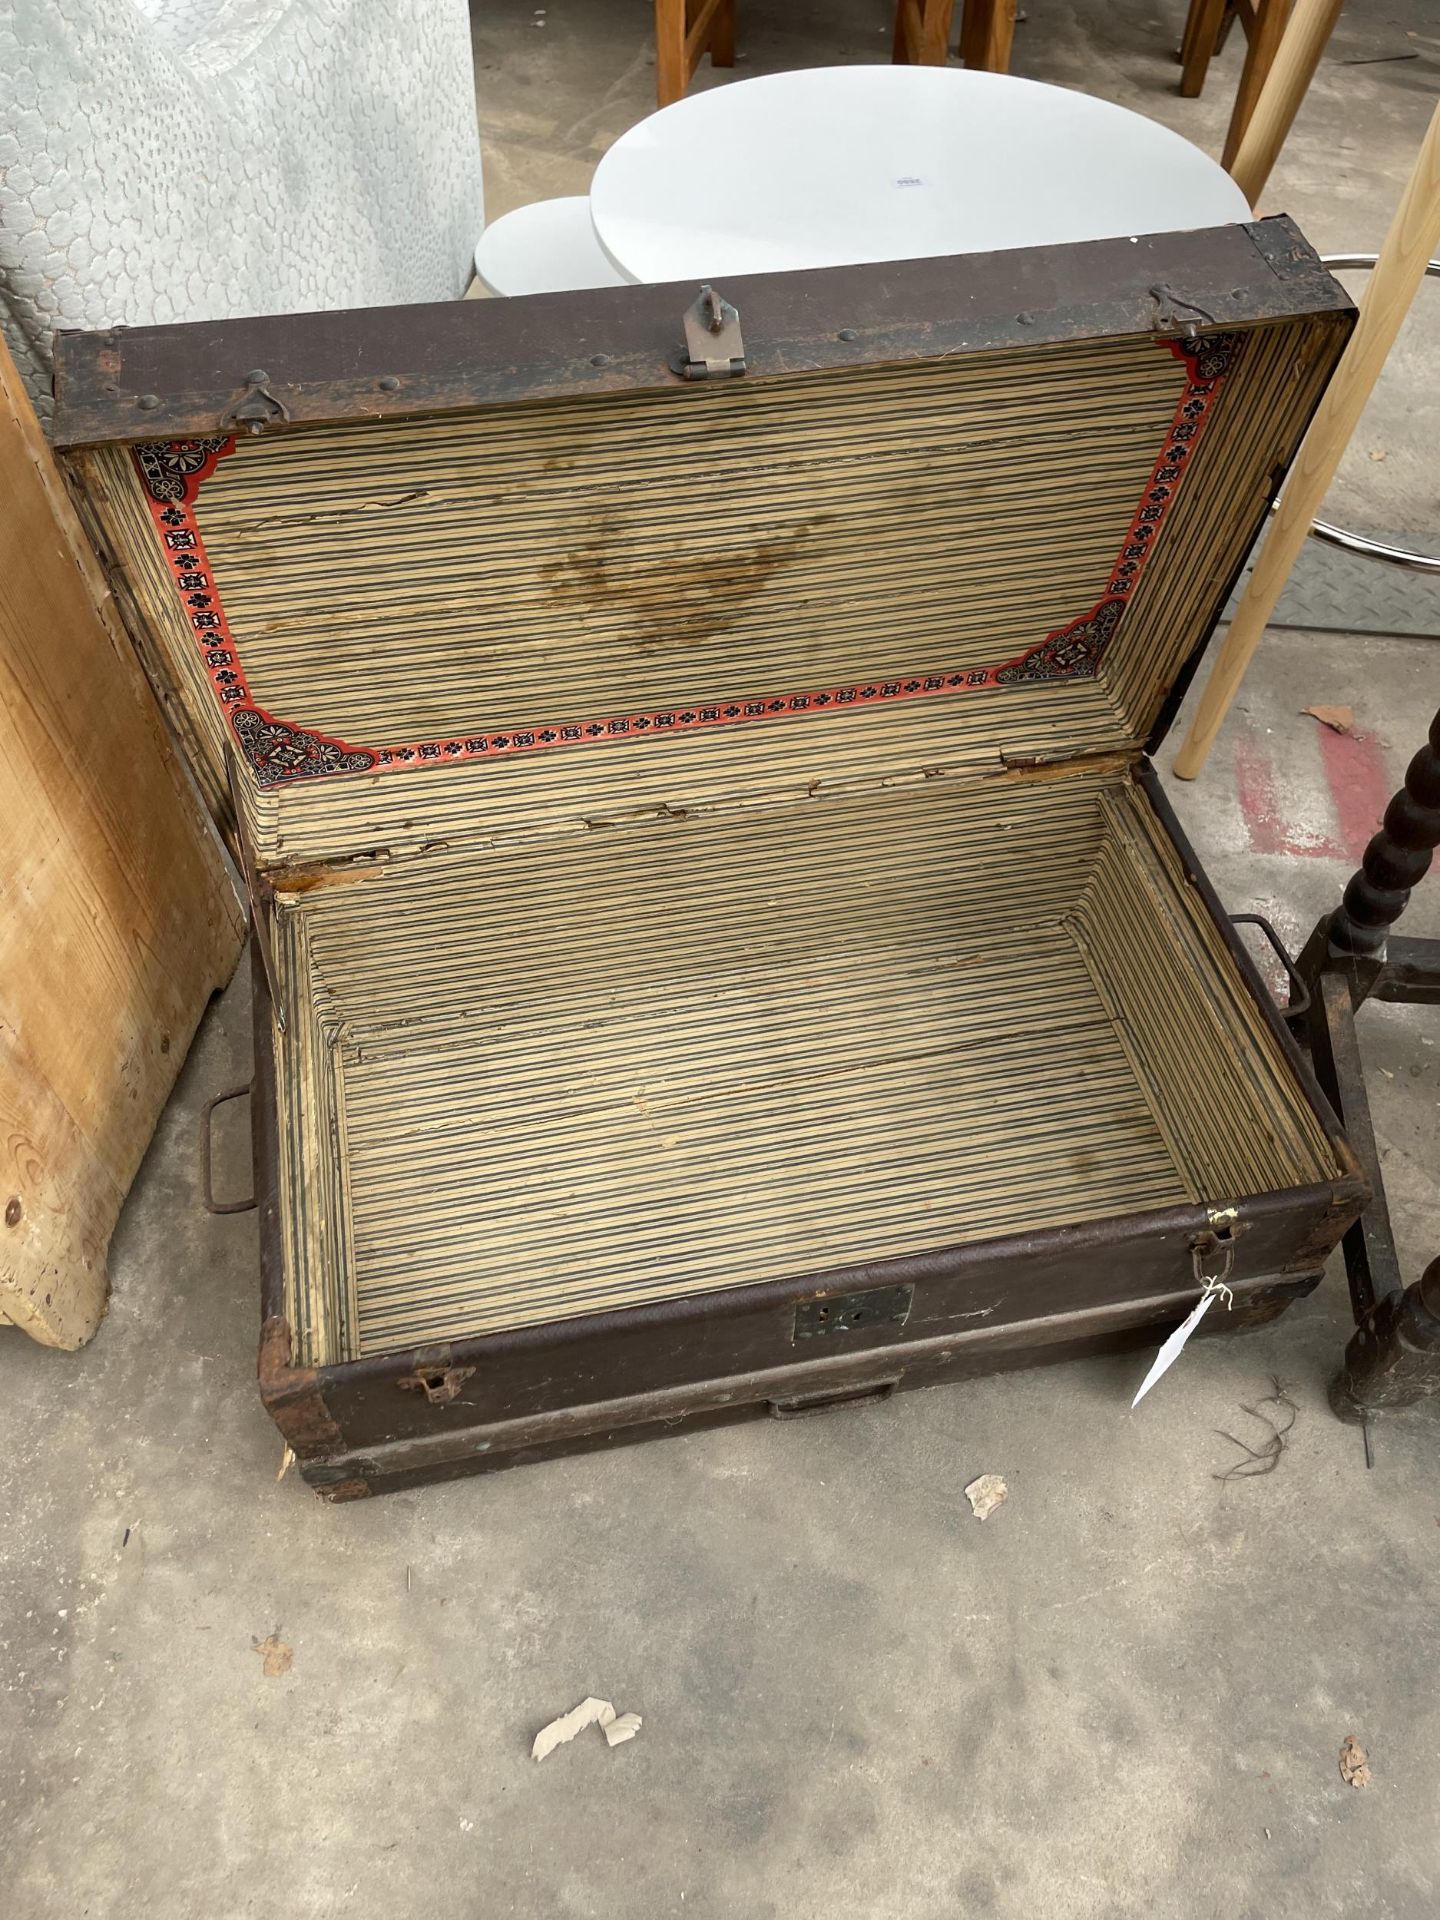 A VICTORIAN CONMPRESSED FIBRE TRAVELLING TRUNK WITH WOODEN SLATS AND METAL FITTINGS - Image 3 of 3